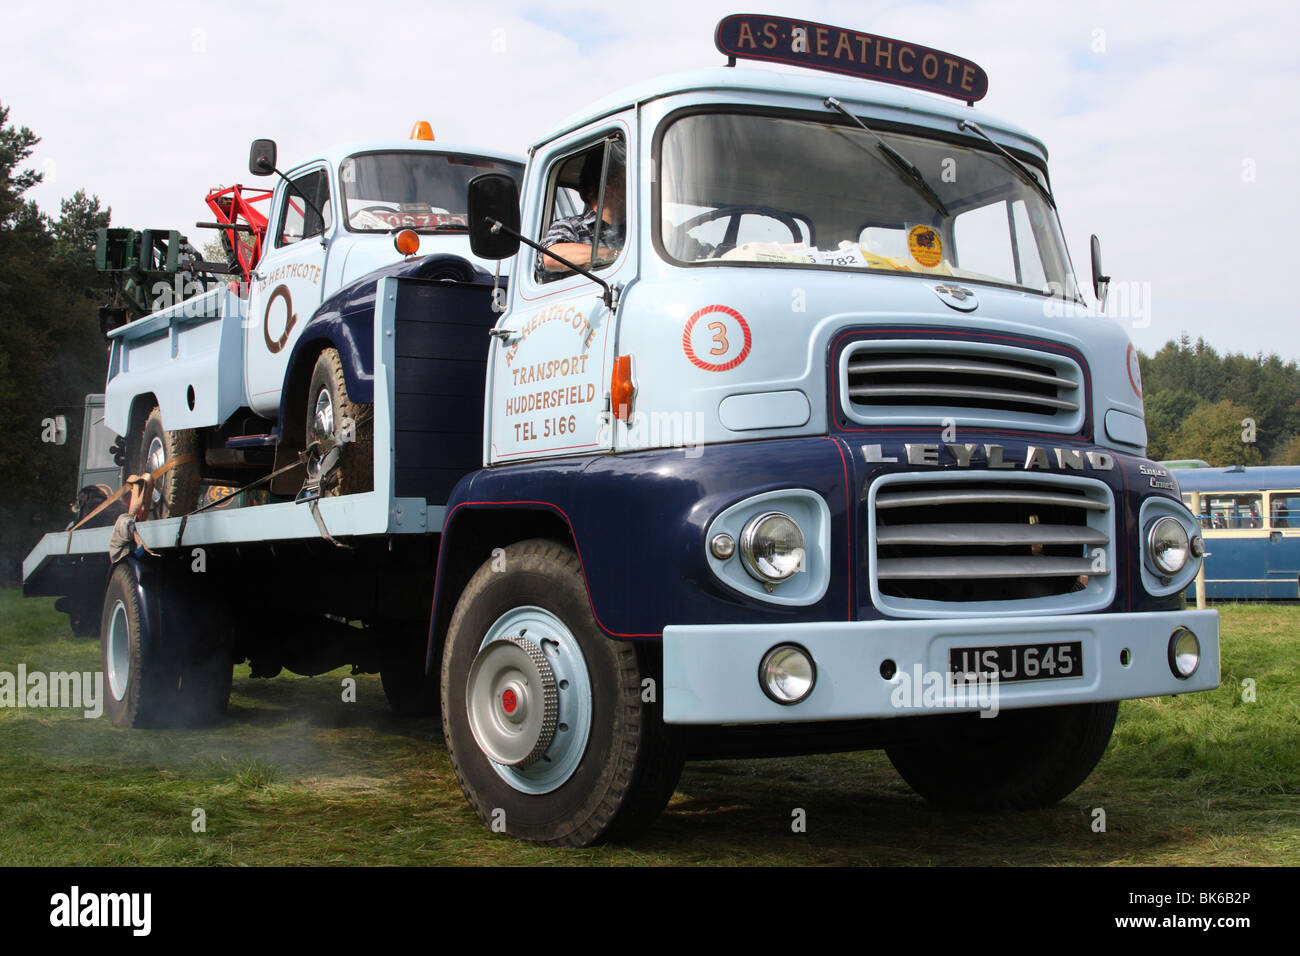 A vintage Leyland lorry at a commercial vehicle show in the U.K. Stock Photo